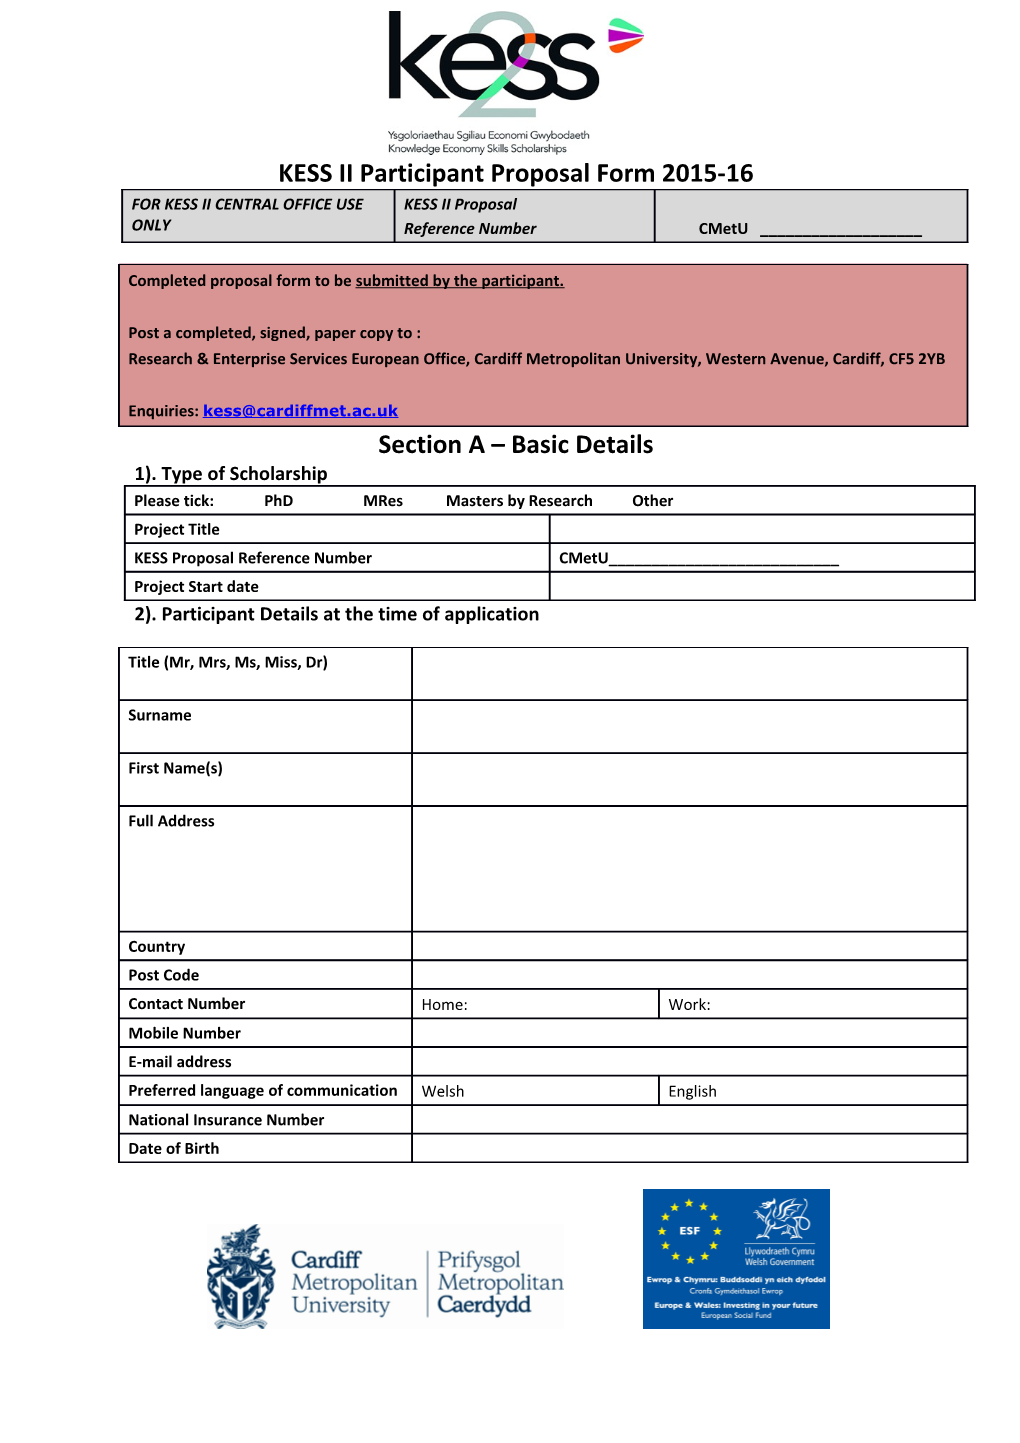 KESS II Participant Proposal Form Cardiff Met